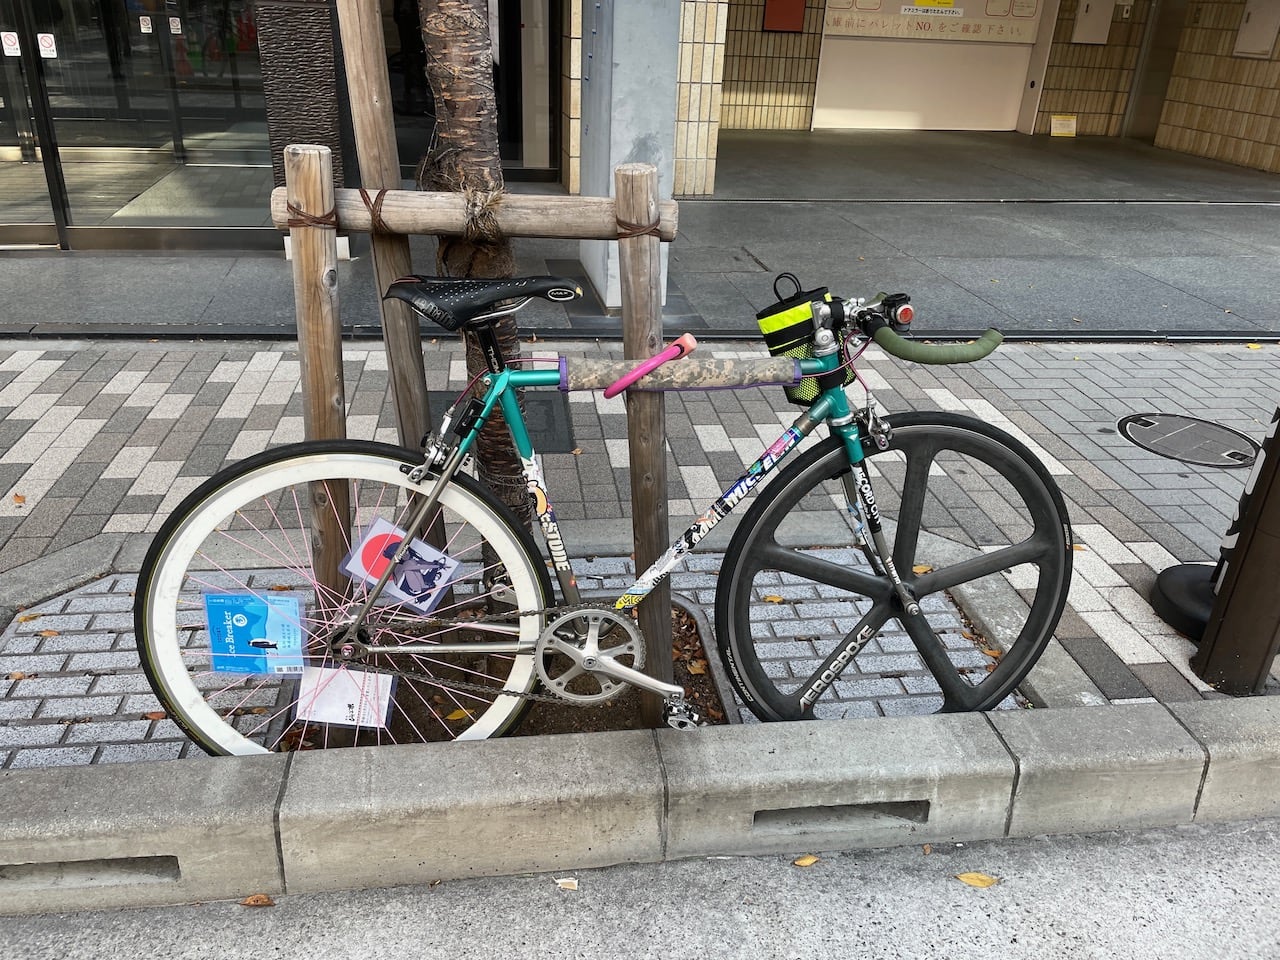 check out this cool bike i saw